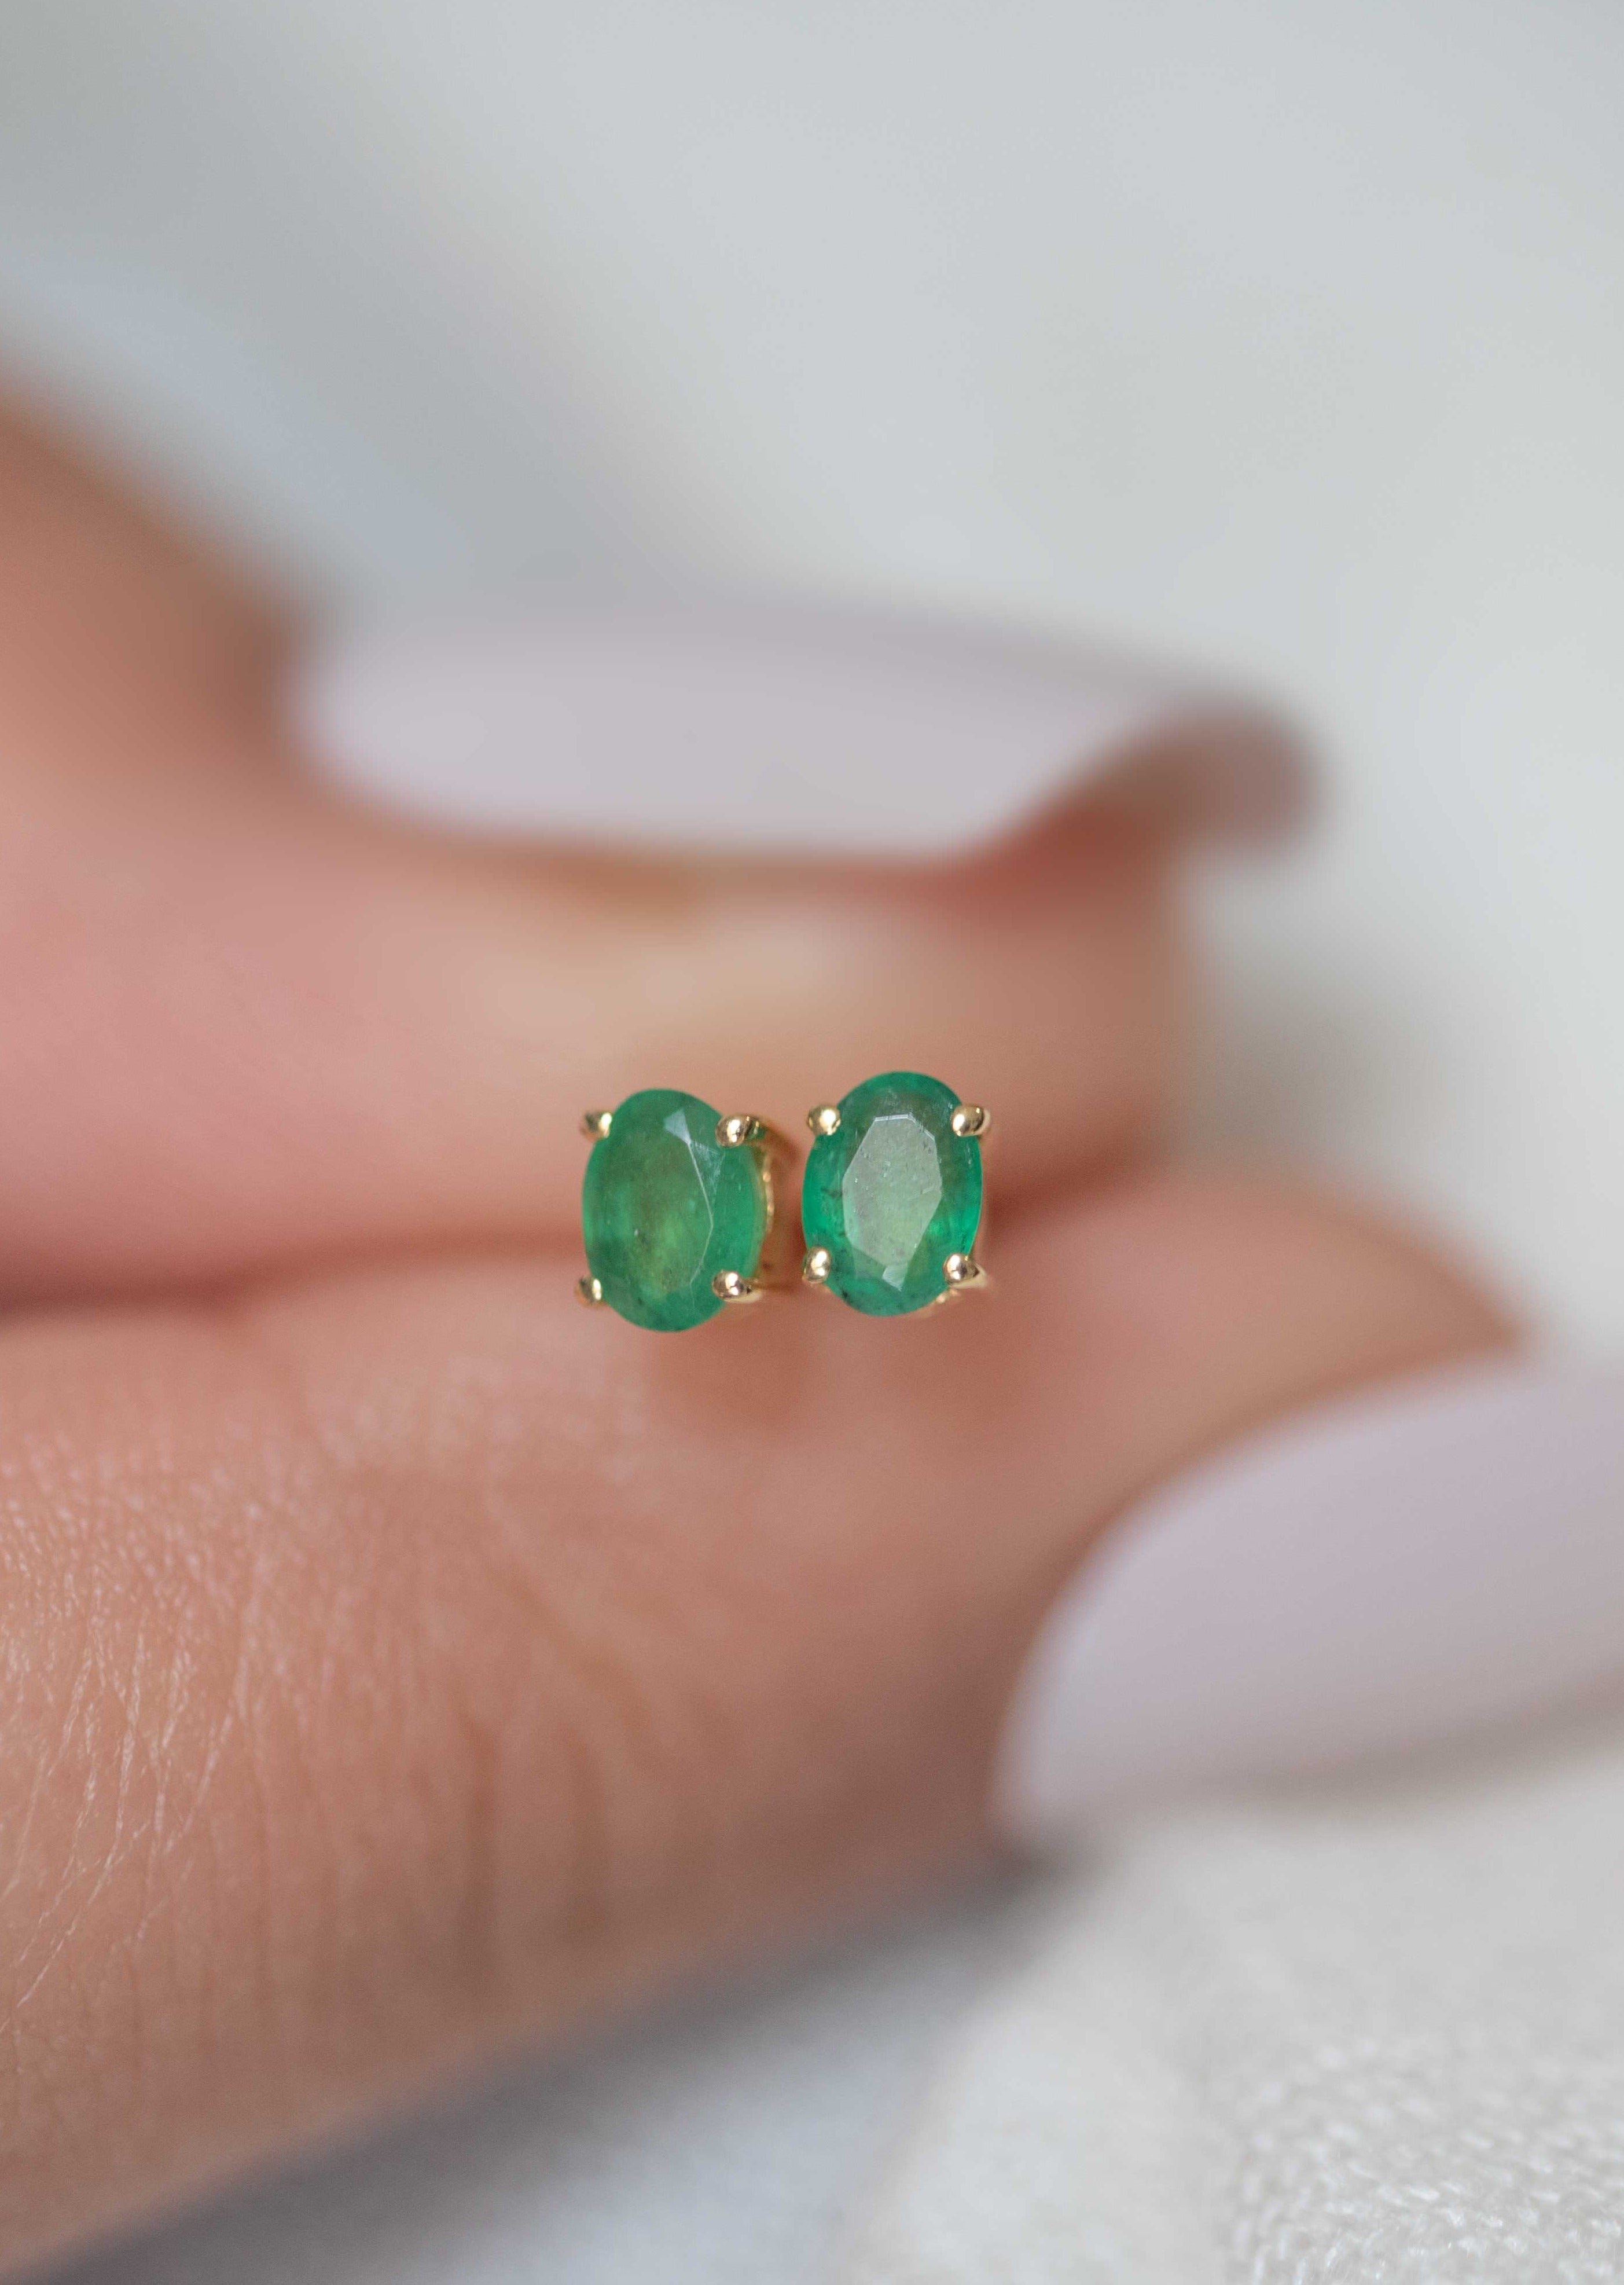 Gemstone earrings, cartilage dainty tiny studs for girls, best gift for teens girl, emerald